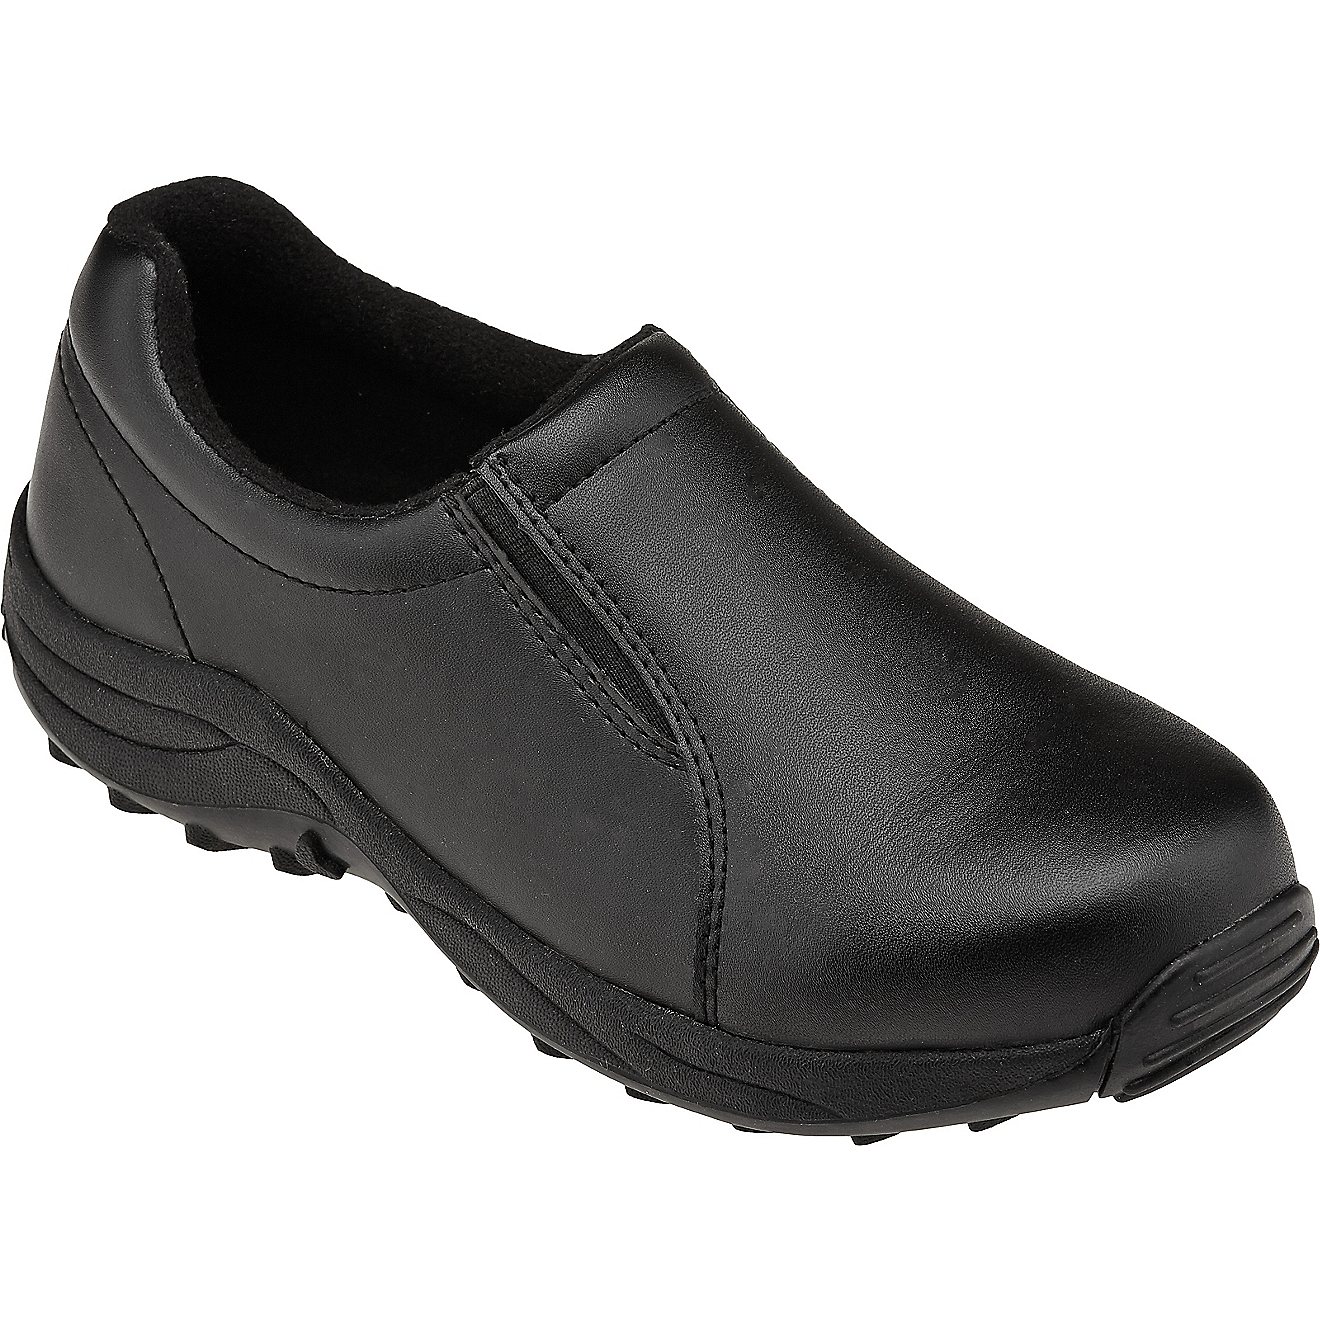 Brazos Women's Steel Toe Slip-on Service Shoes                                                                                   - view number 2